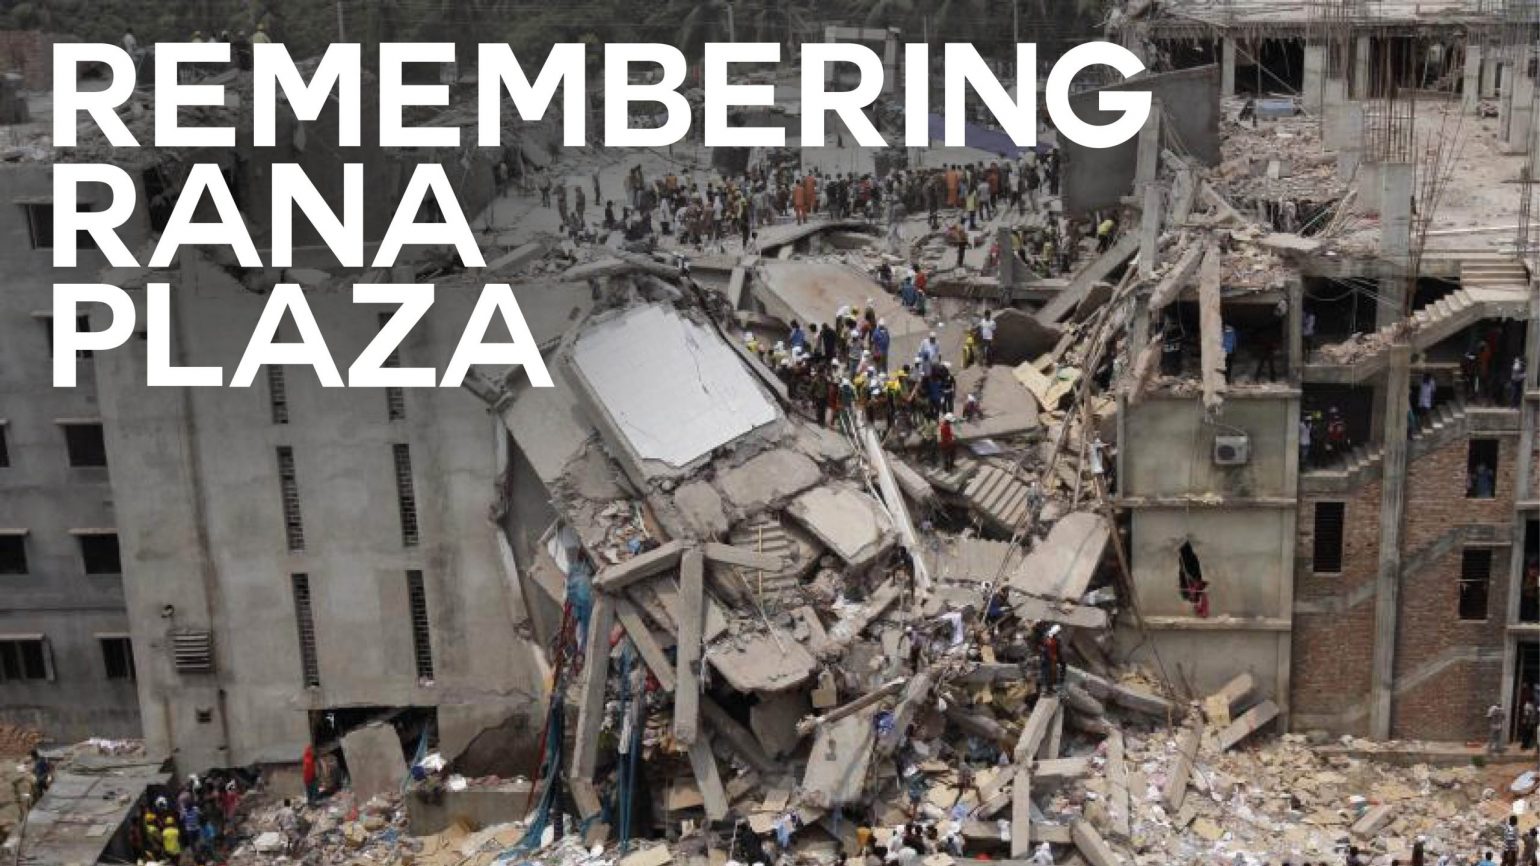 A photo of the Rana Plaza building collapse with text overlaid reading "Remembering Rana Plaza"